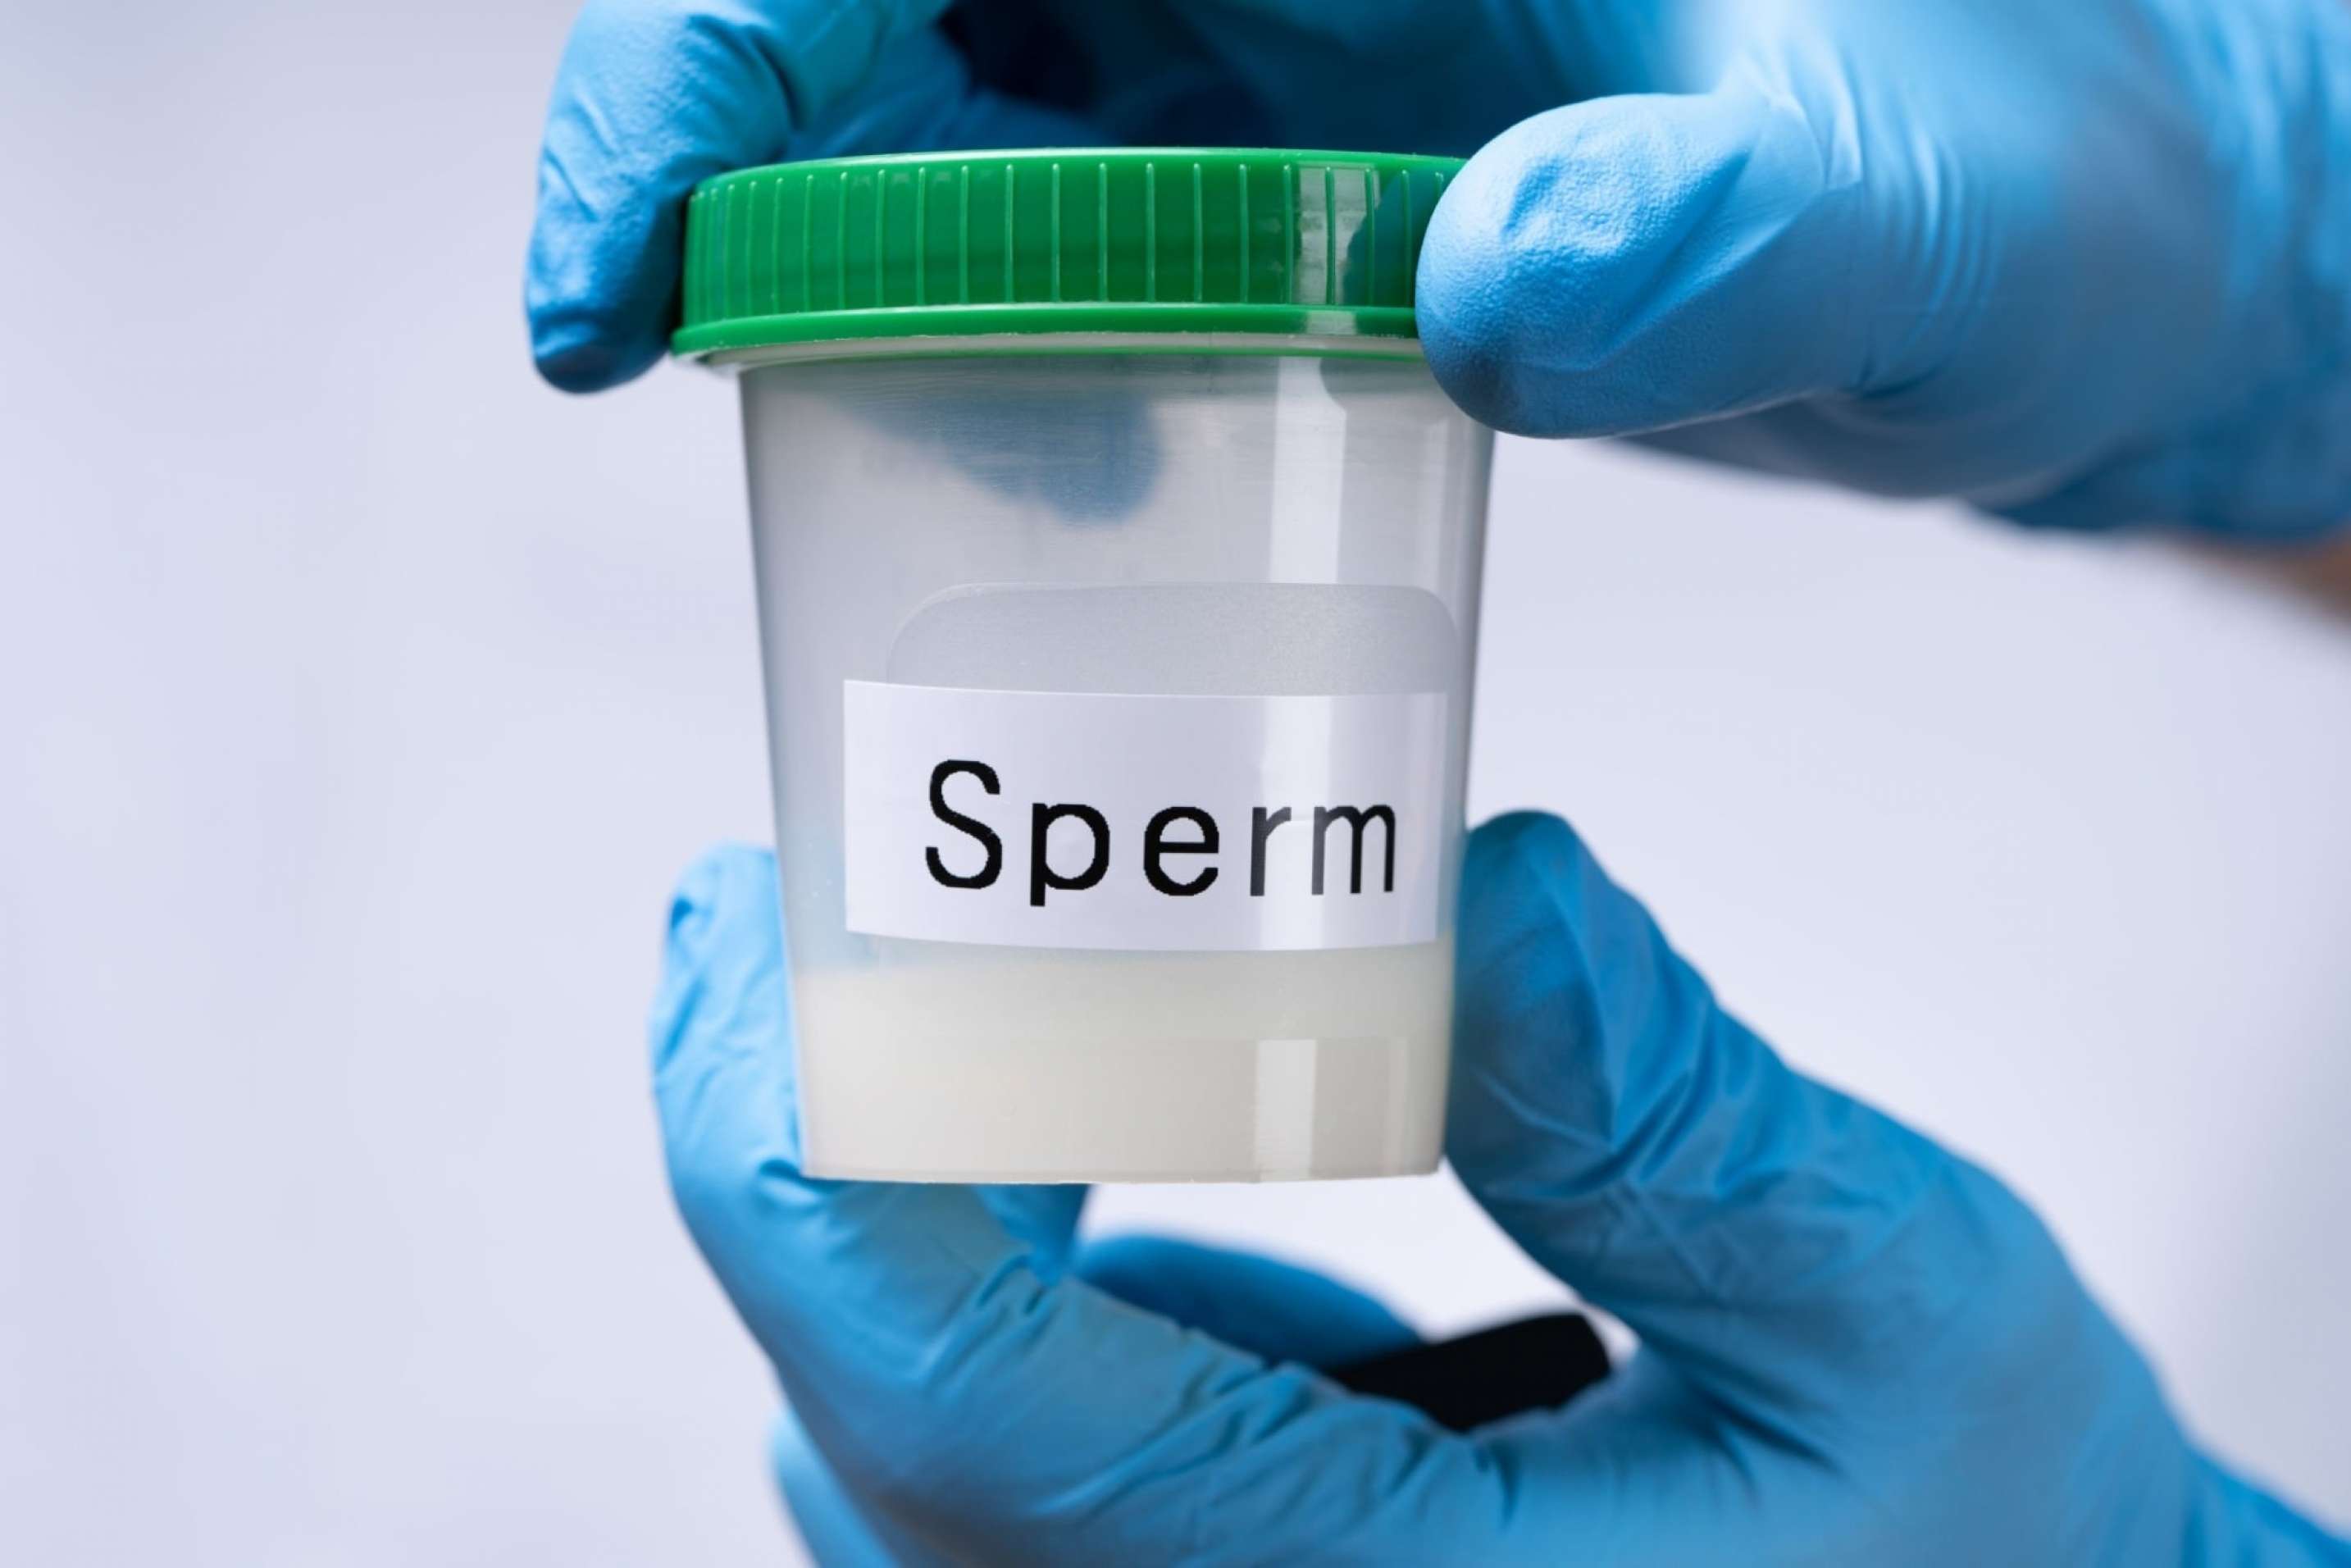 If you need donor sperm to get conceived, IUI may be one of the best options for you, which can be done with the frozen sperm preserved already.